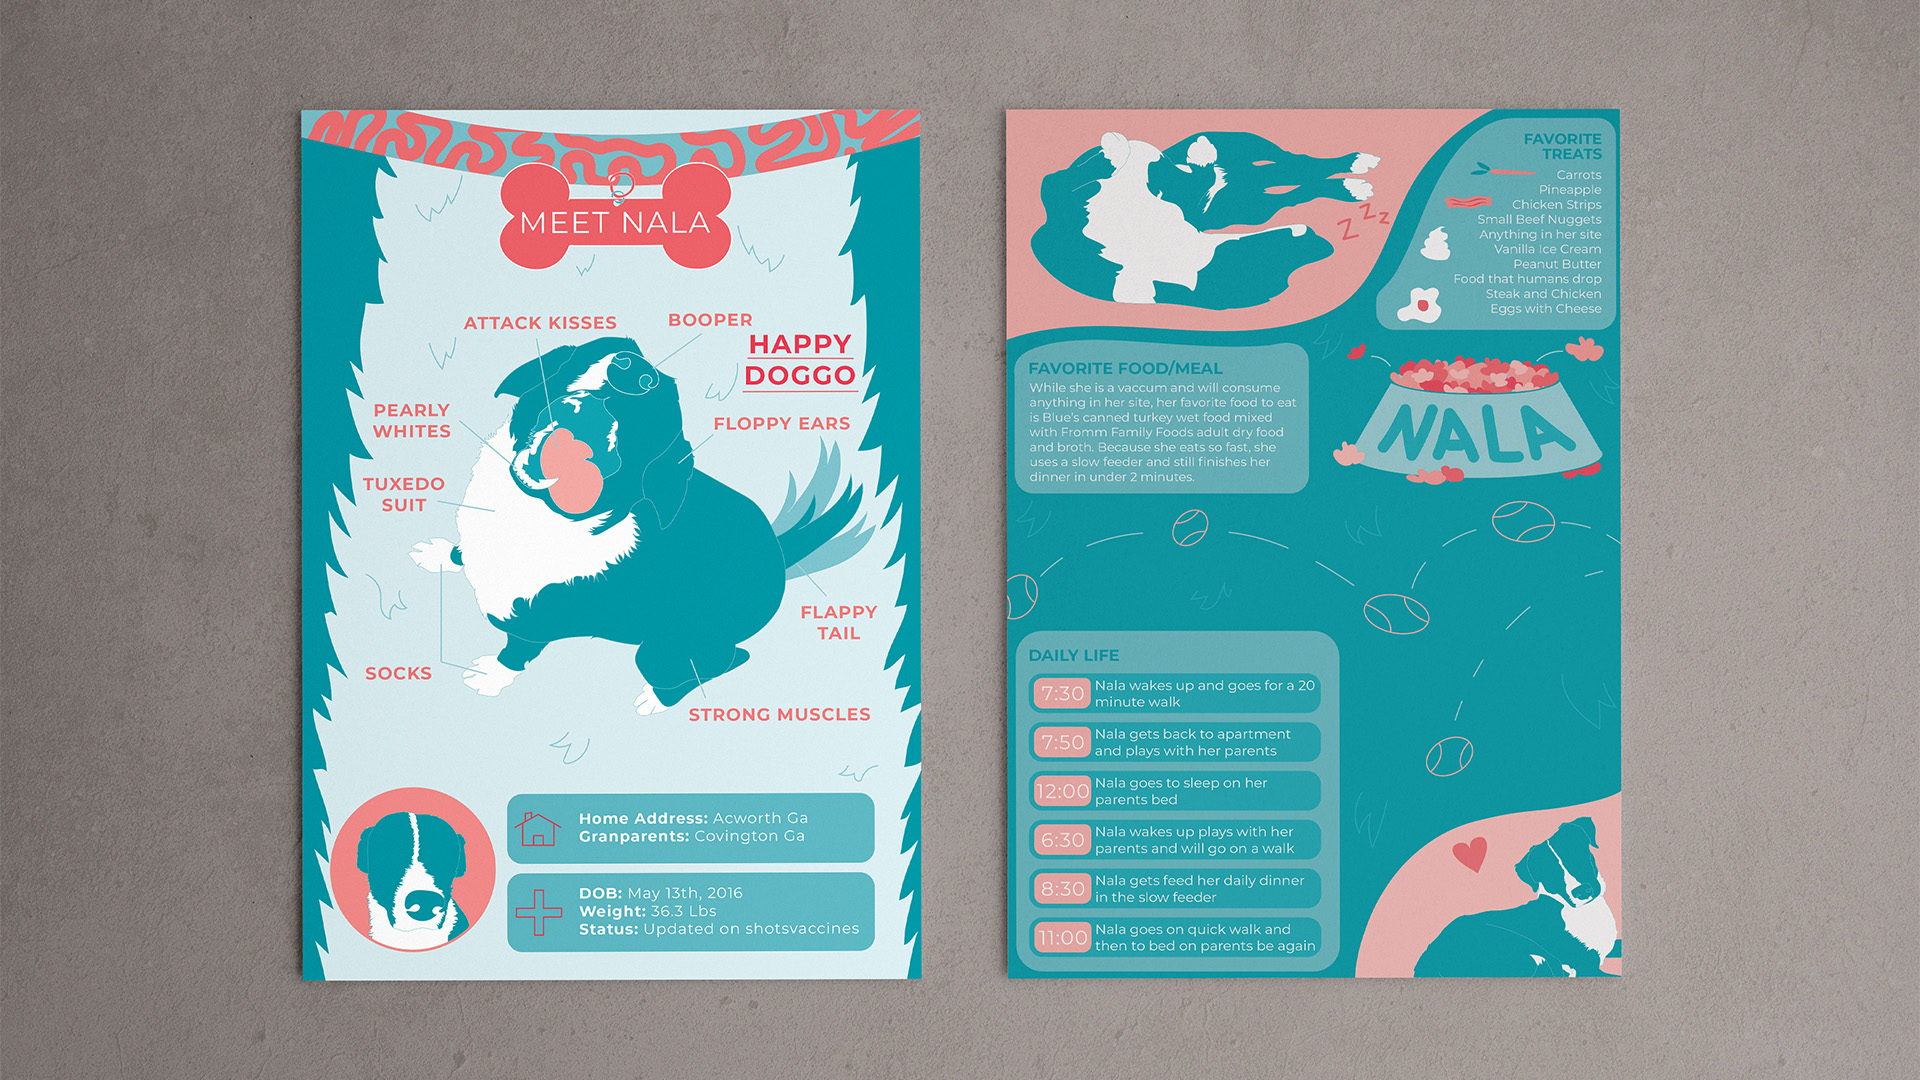 "Nala Care Infographic," / "Nala Care Infographic," poster, 11 x 17 inch printed, 2022. This is a two-color poster that depicts information for the care of Nala.